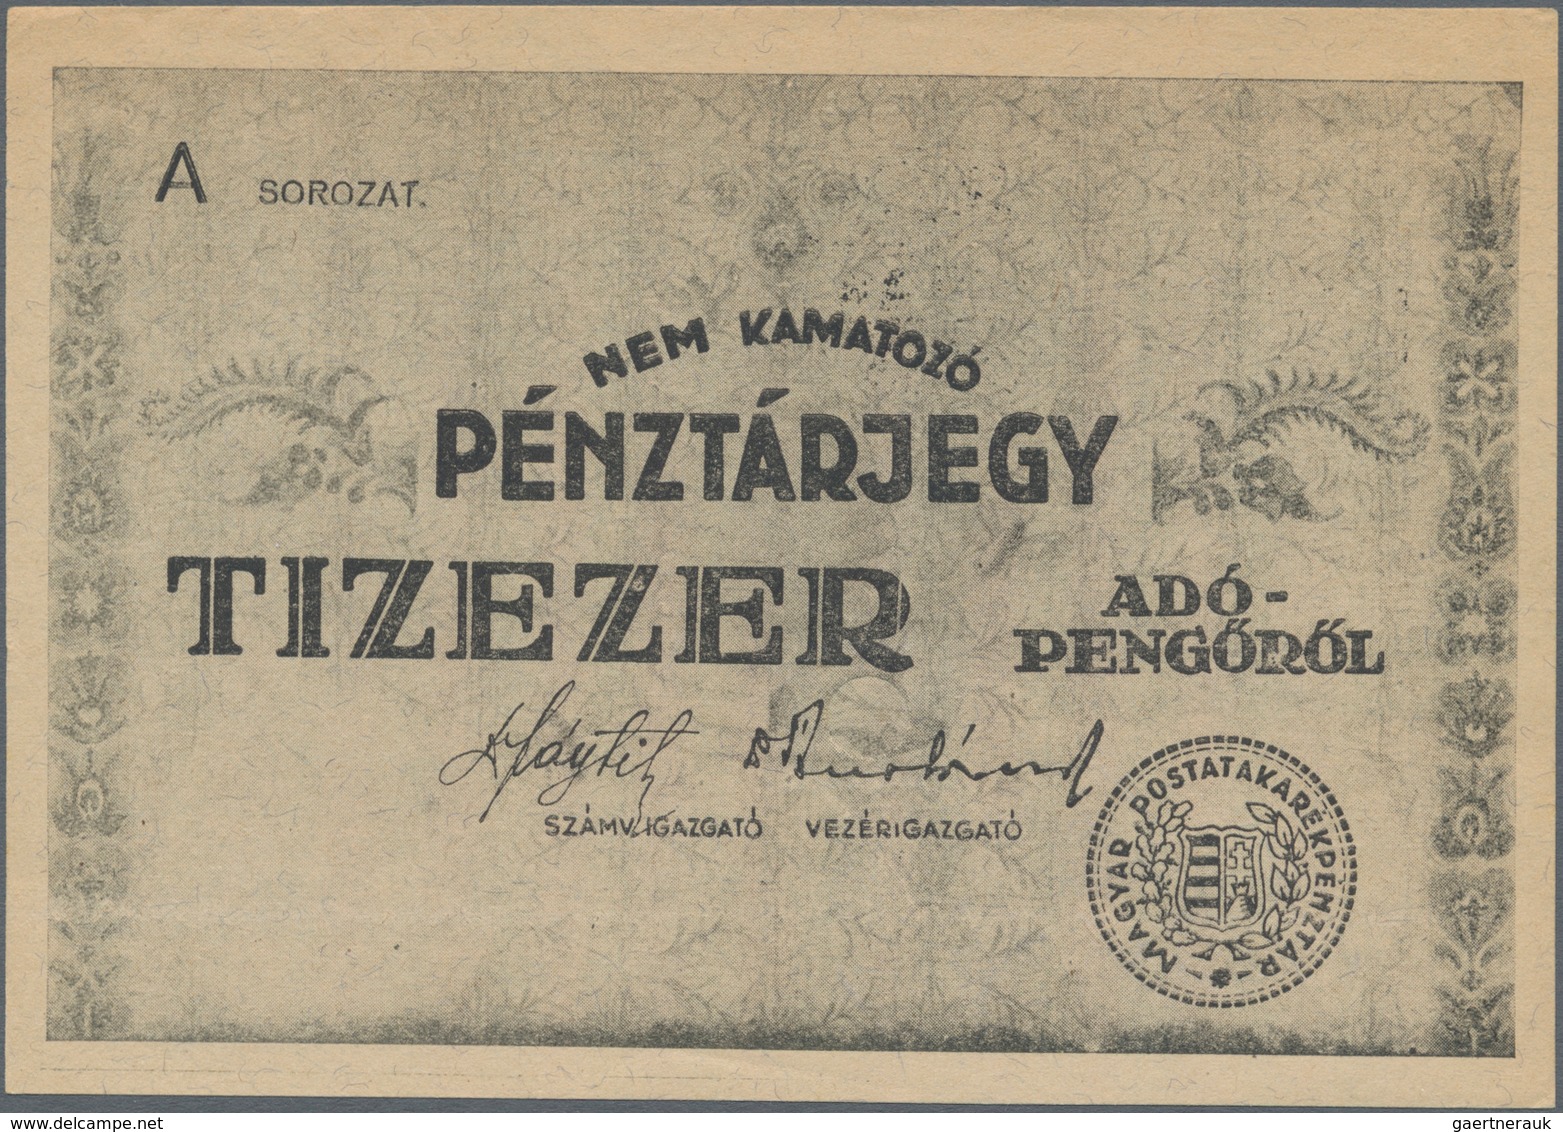 Hungary / Ungarn: Hungarian Post Office Savings Bank high value lot with 9 banknotes of the 1946 Ado